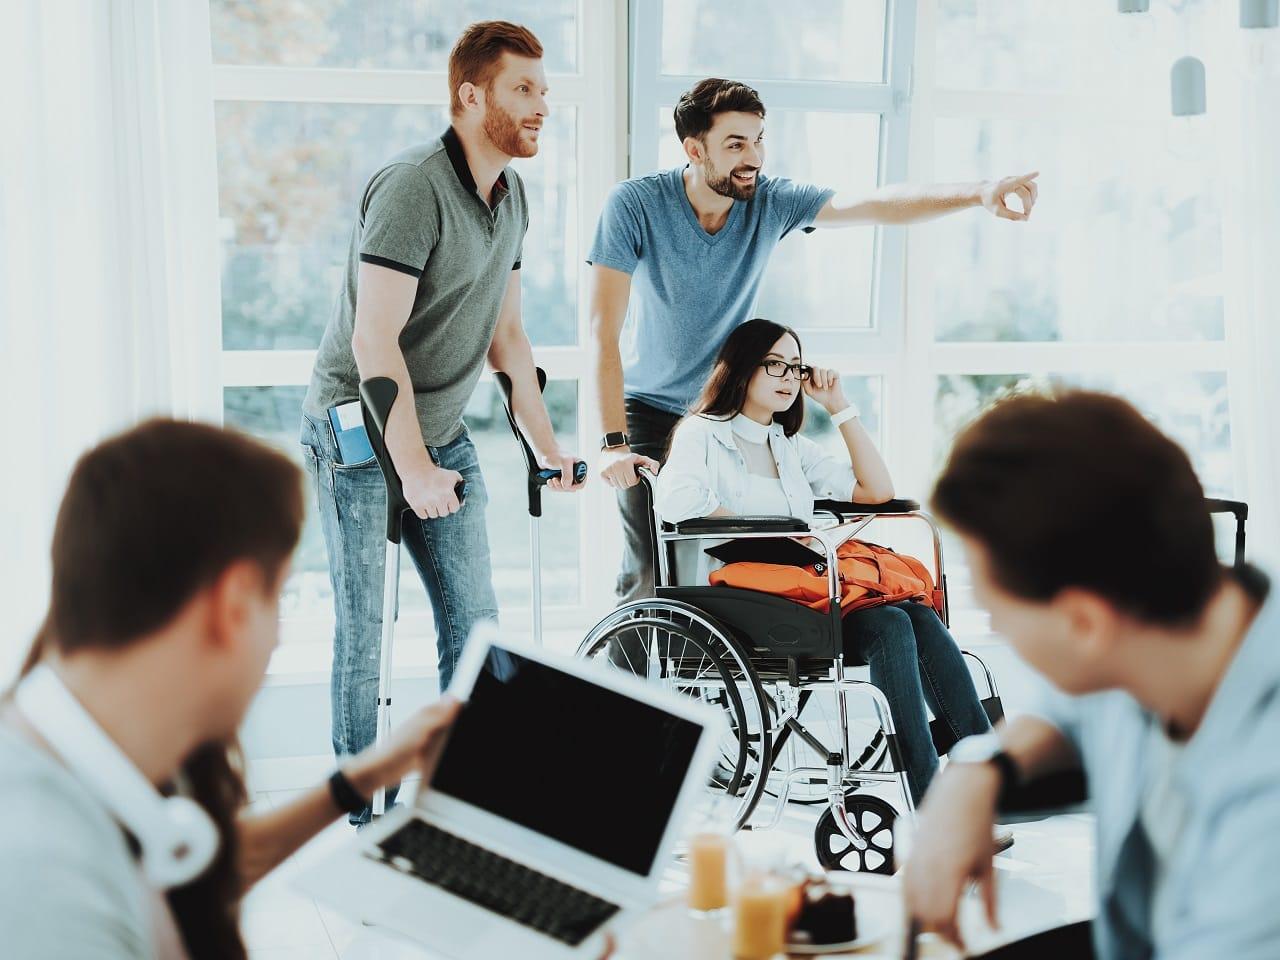 This image shows a woman in a wheelchair being pushed by a staff.